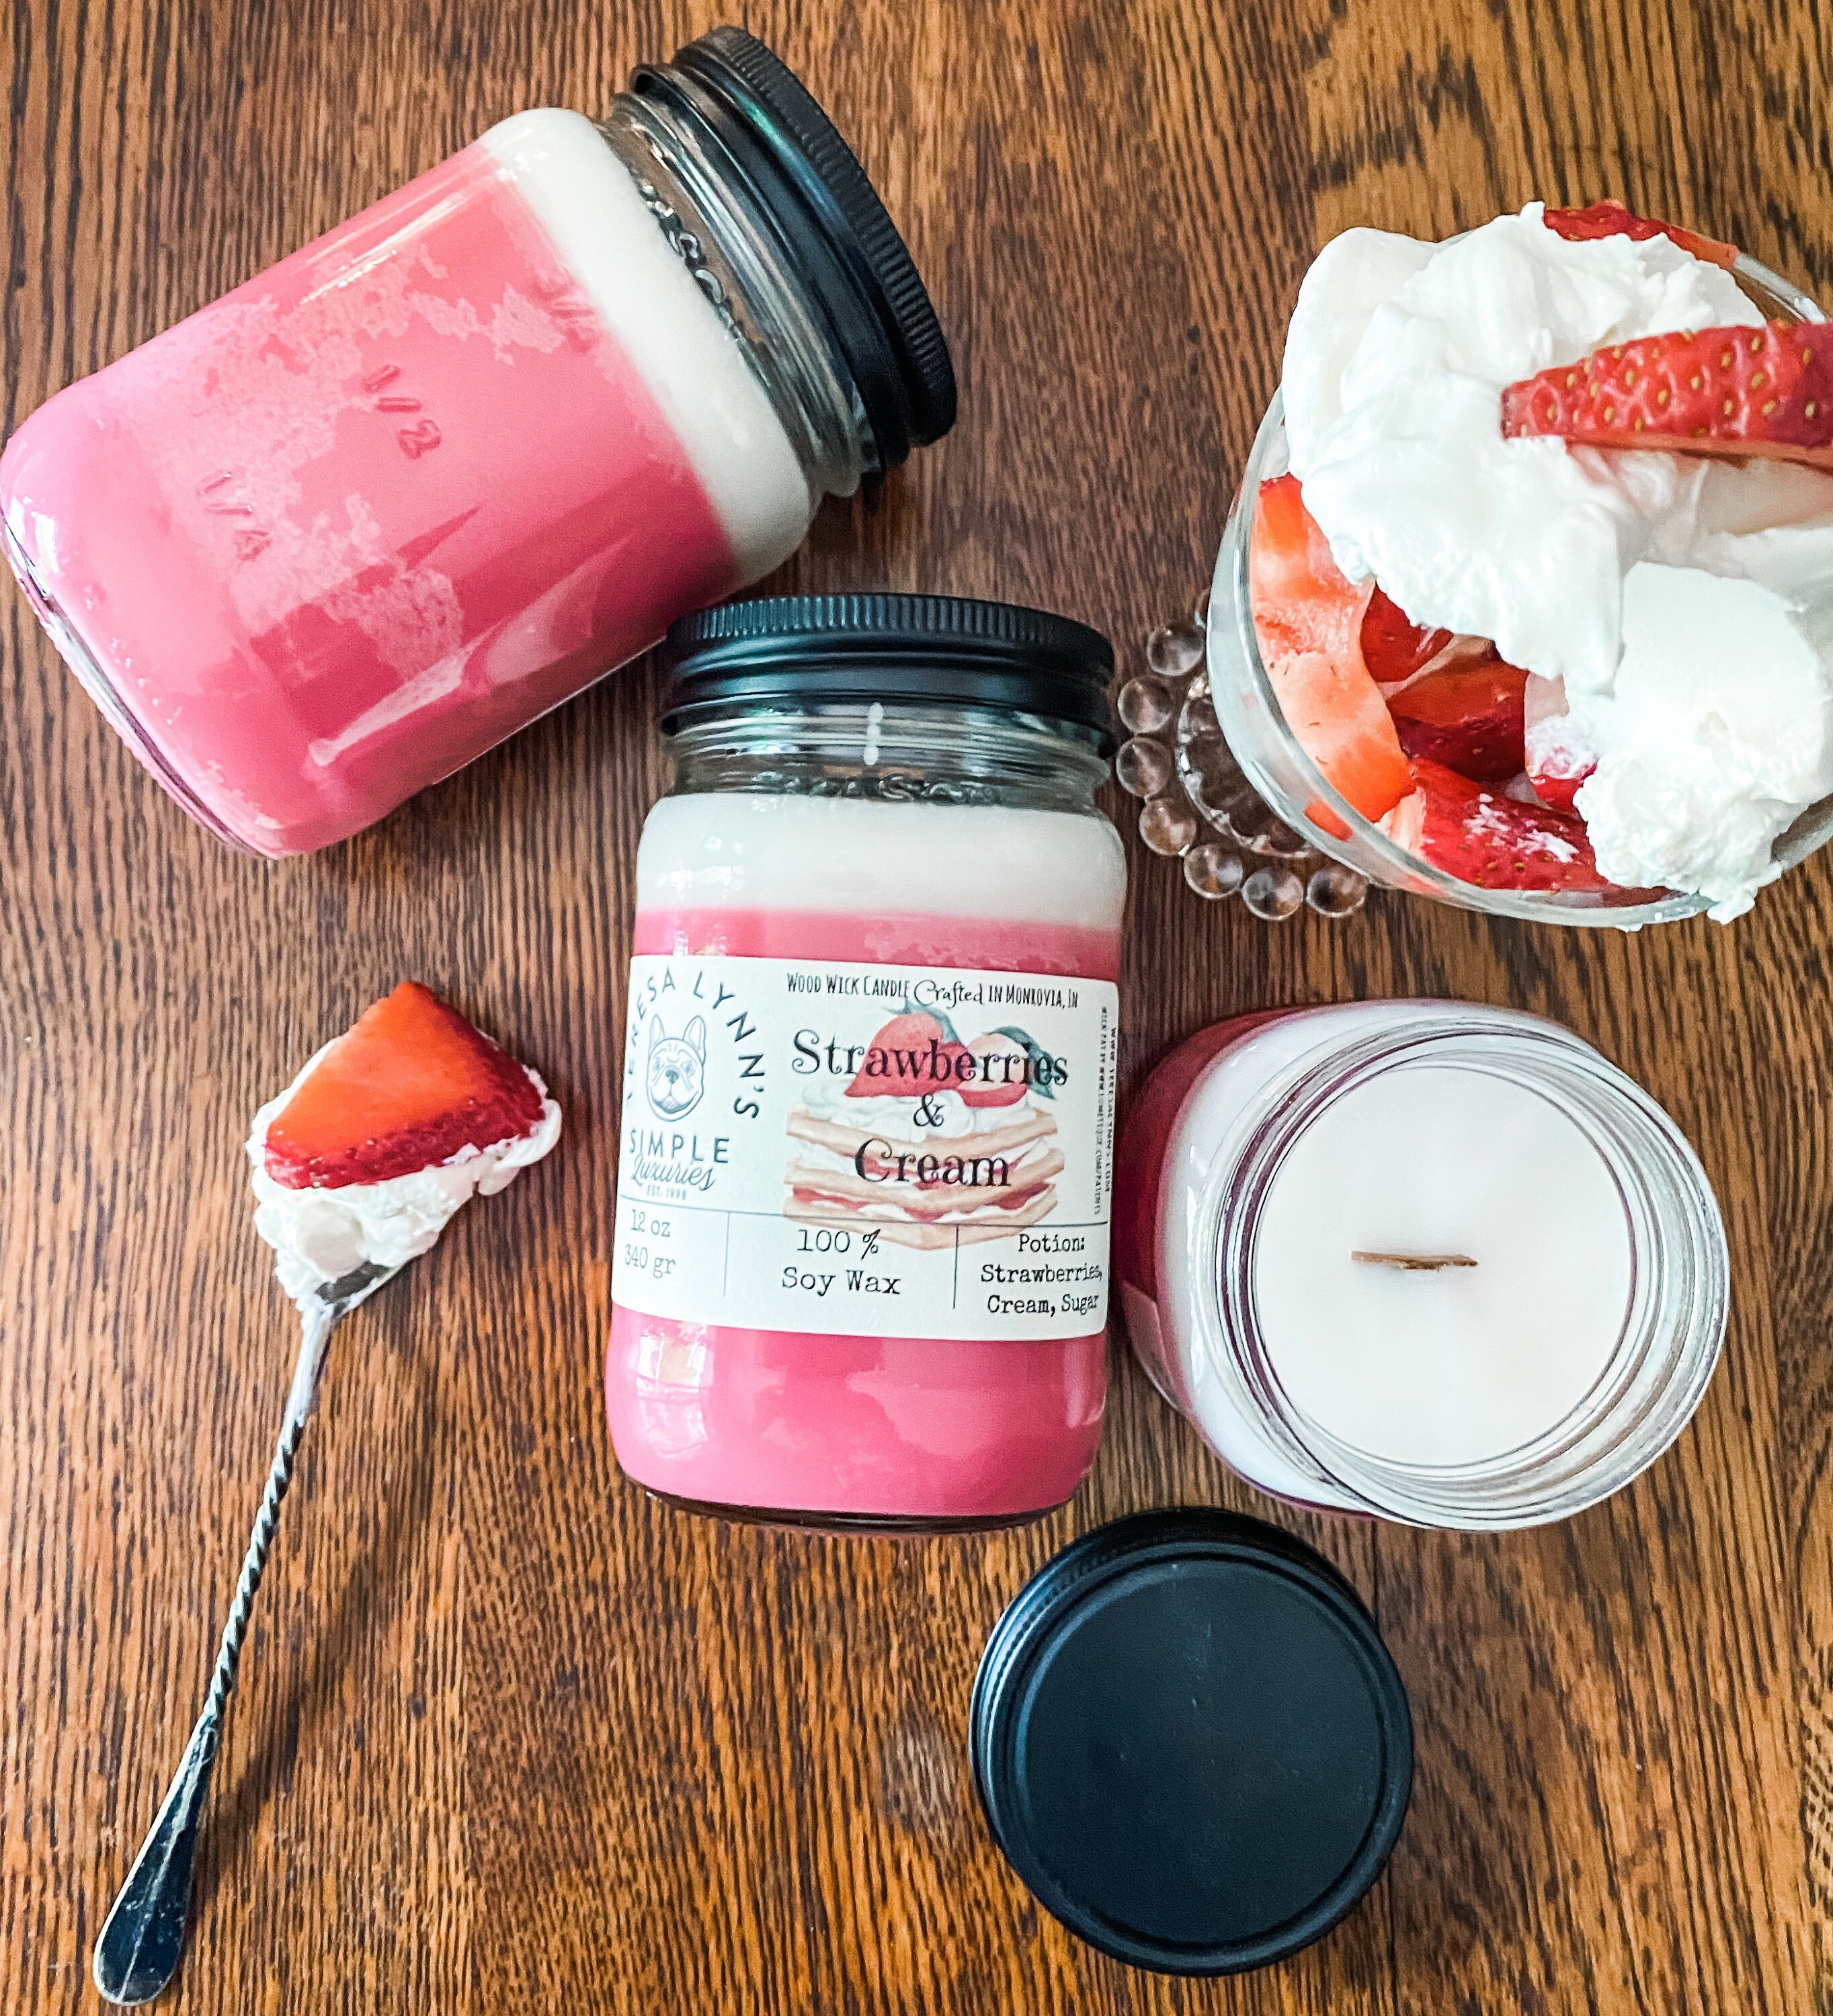 fruit candle scented candle strawberry candle mason jar candle Strawberries and Cream wood wick berry candle fresh scent soy candle